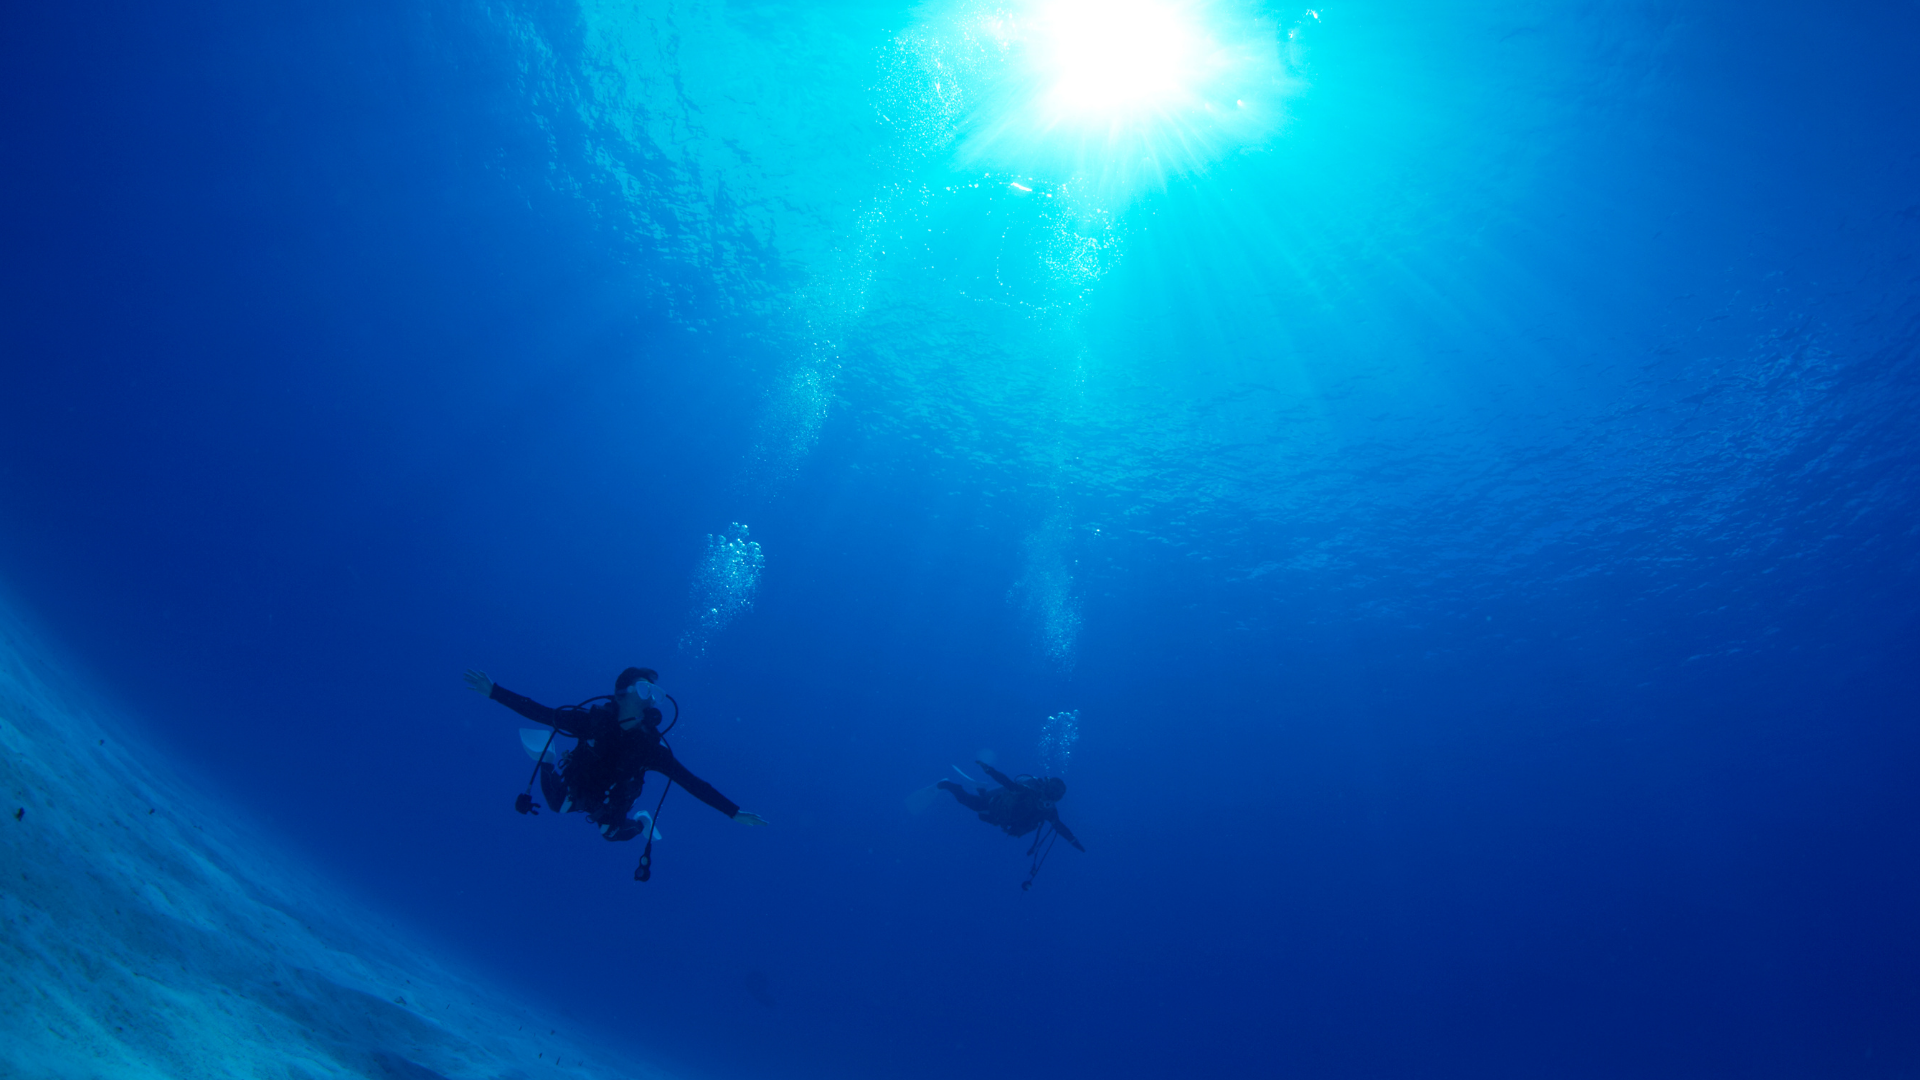 Learn to orient yourself underwater with these tips.